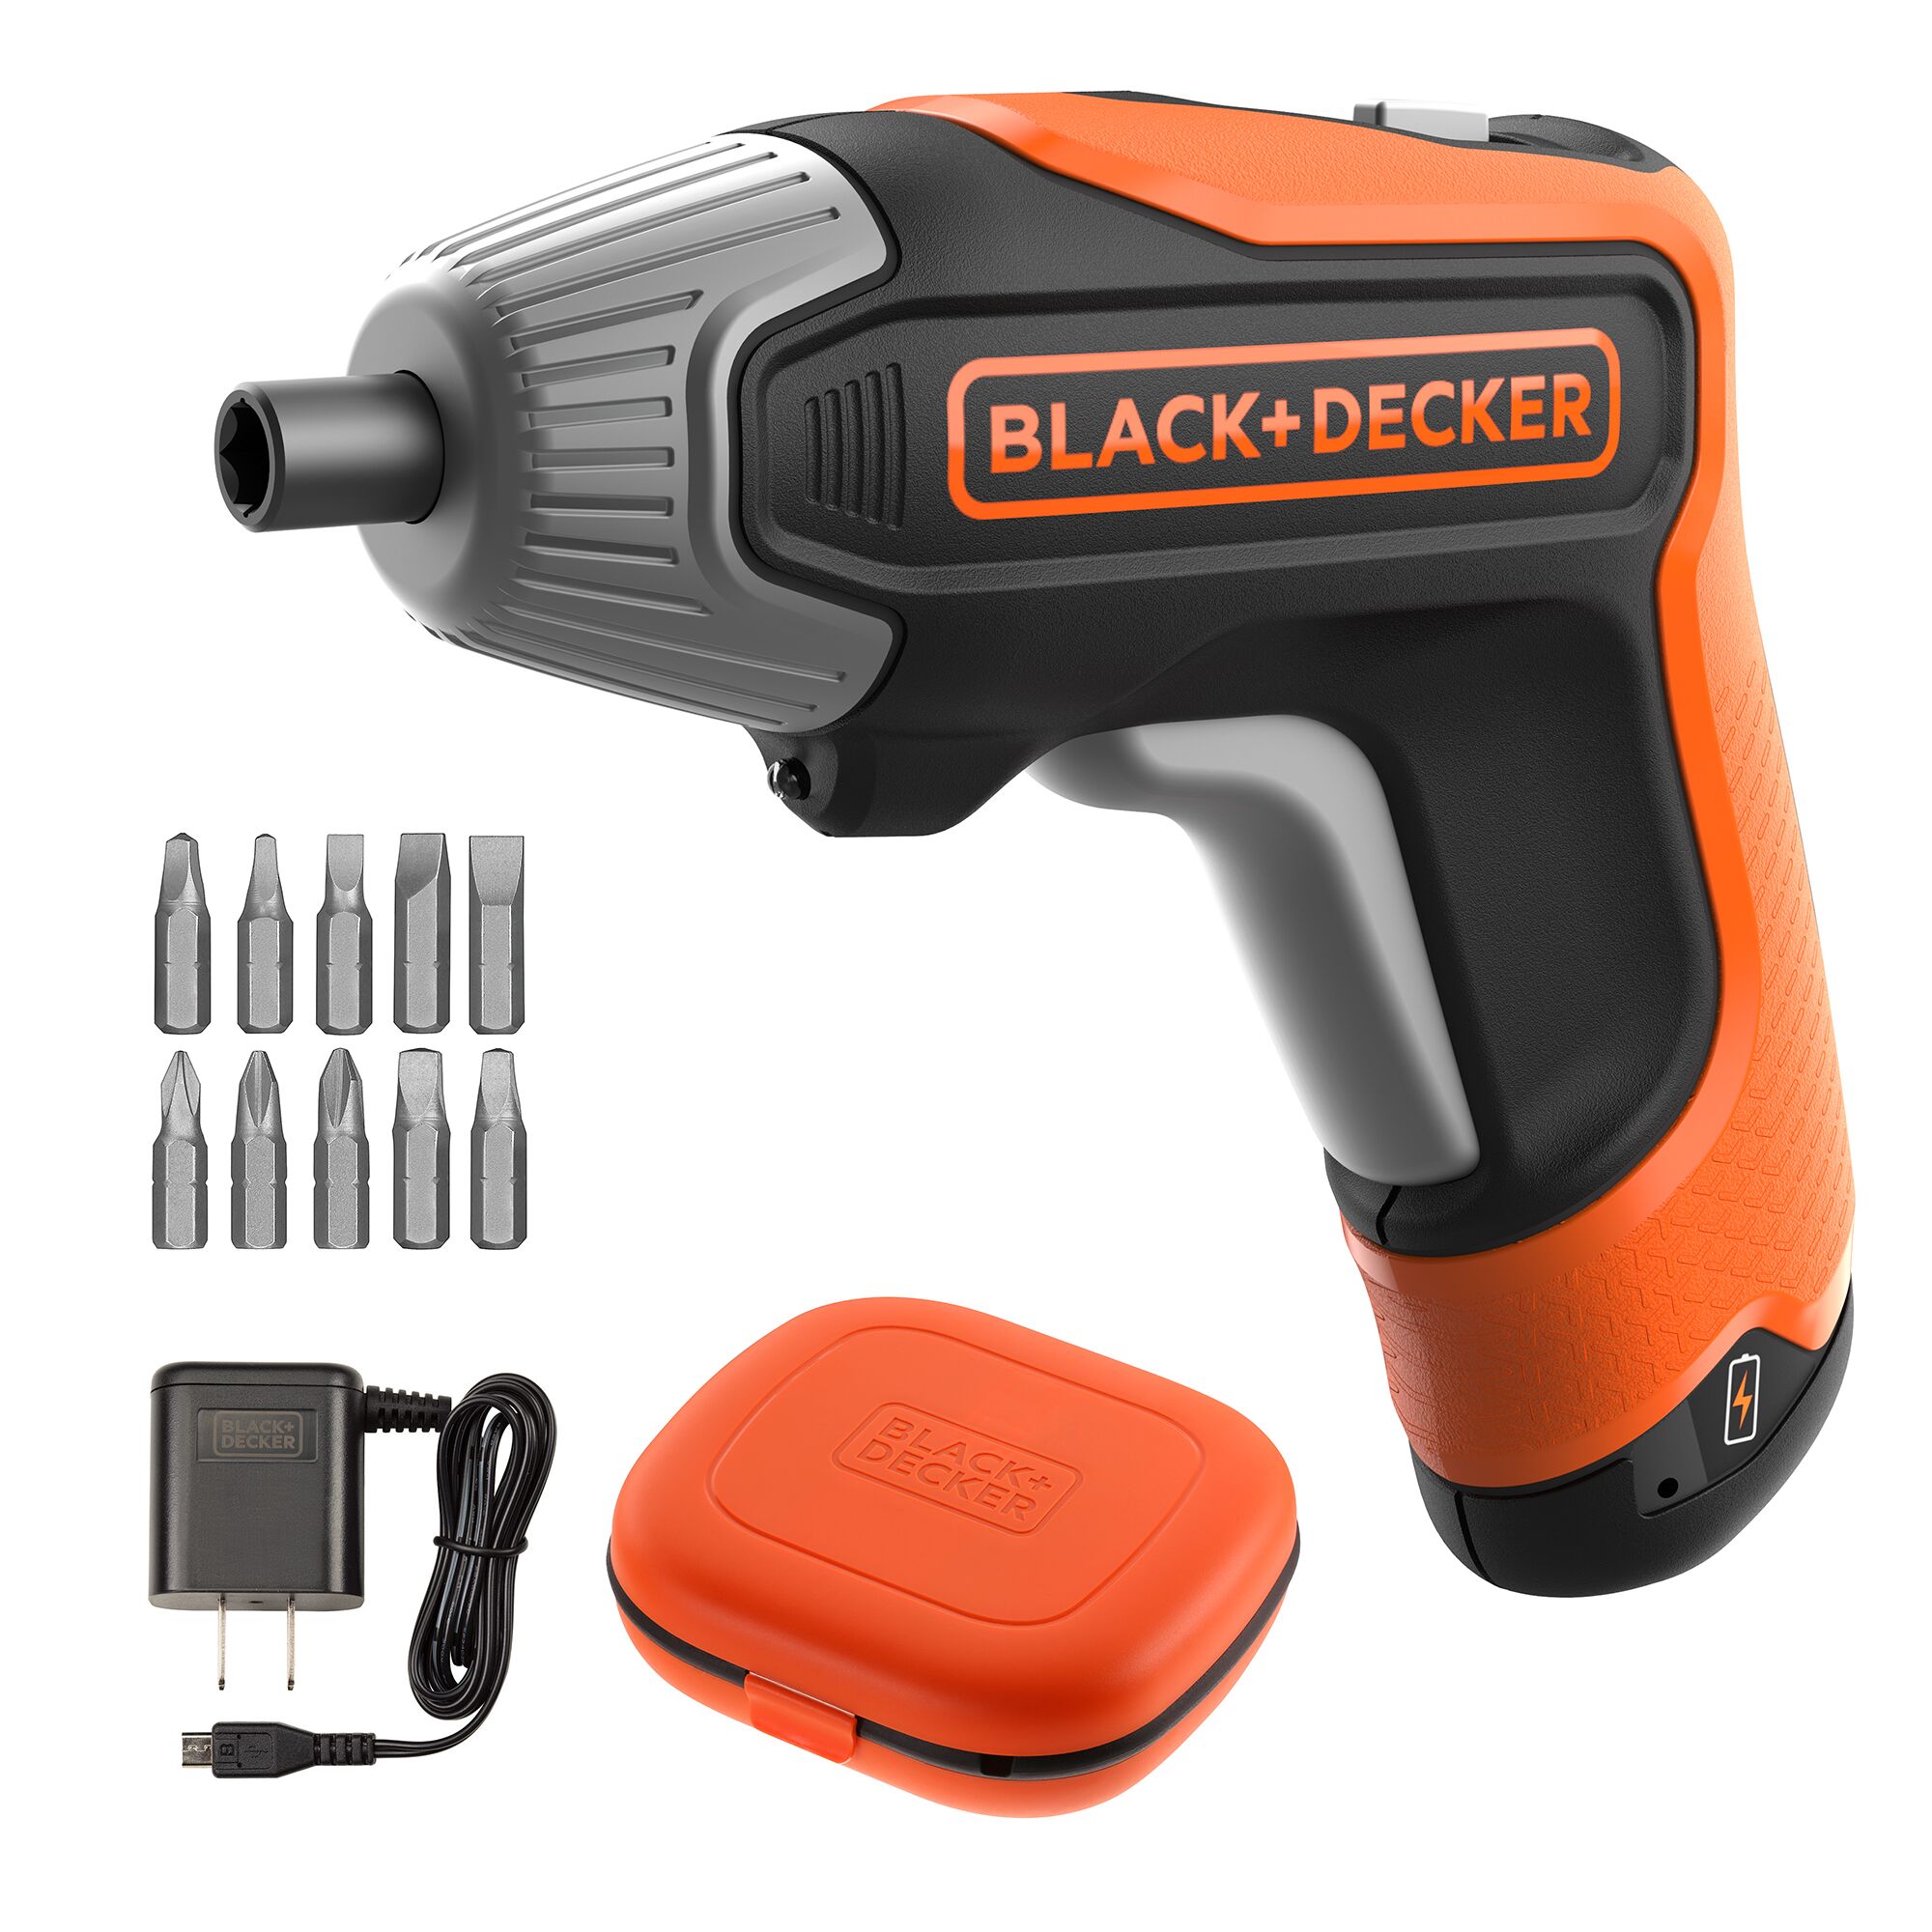 View of BLACK+DECKER 4V Max Cordless Screwdriver with bits, charger and storage case